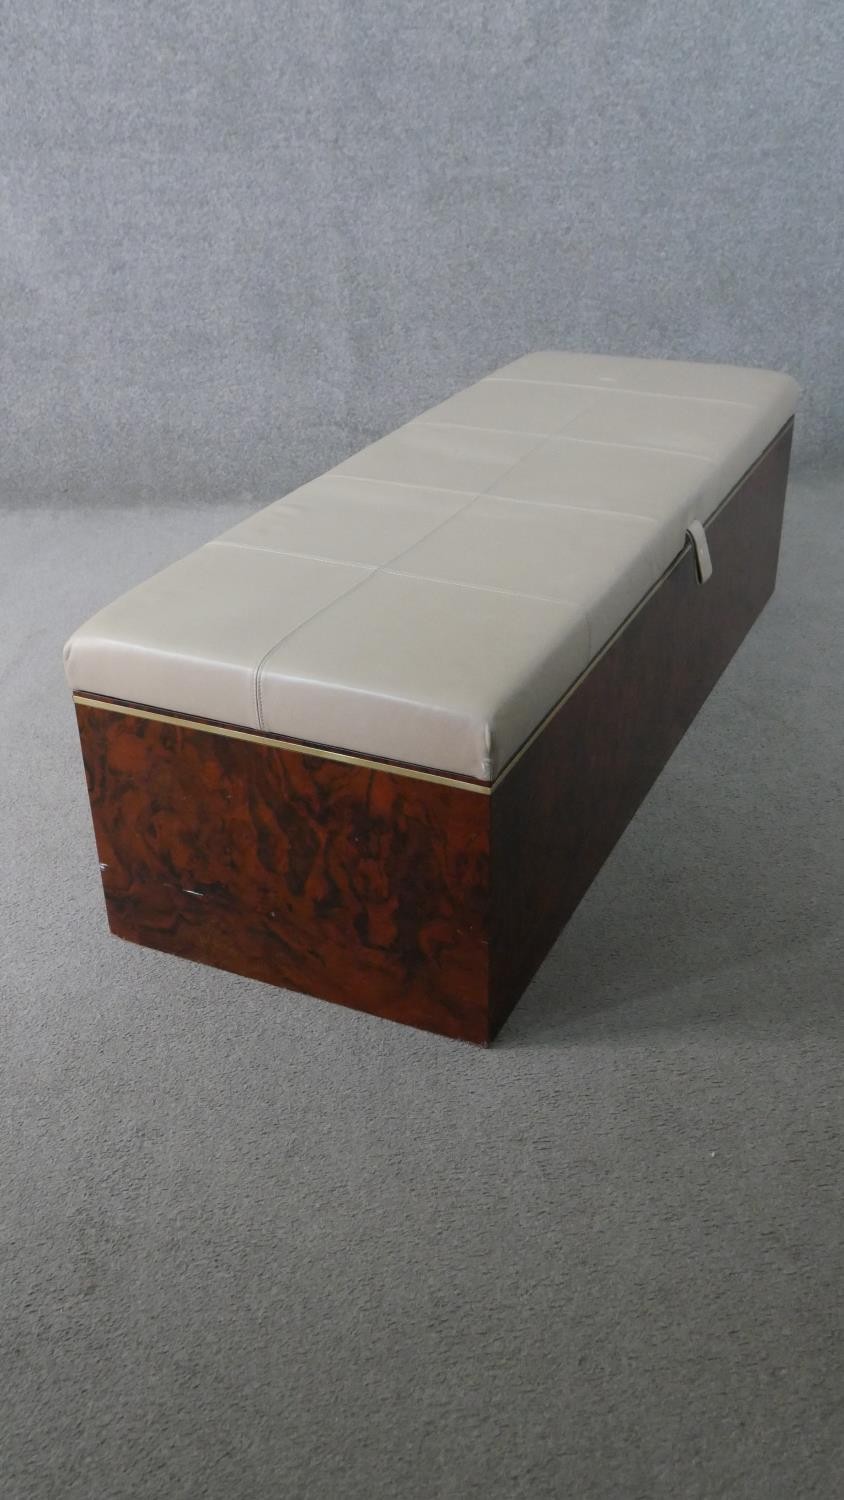 A figured walnut Ottoman, of slender rectangular form, with a white upholstered leather cushion lid, - Image 2 of 6